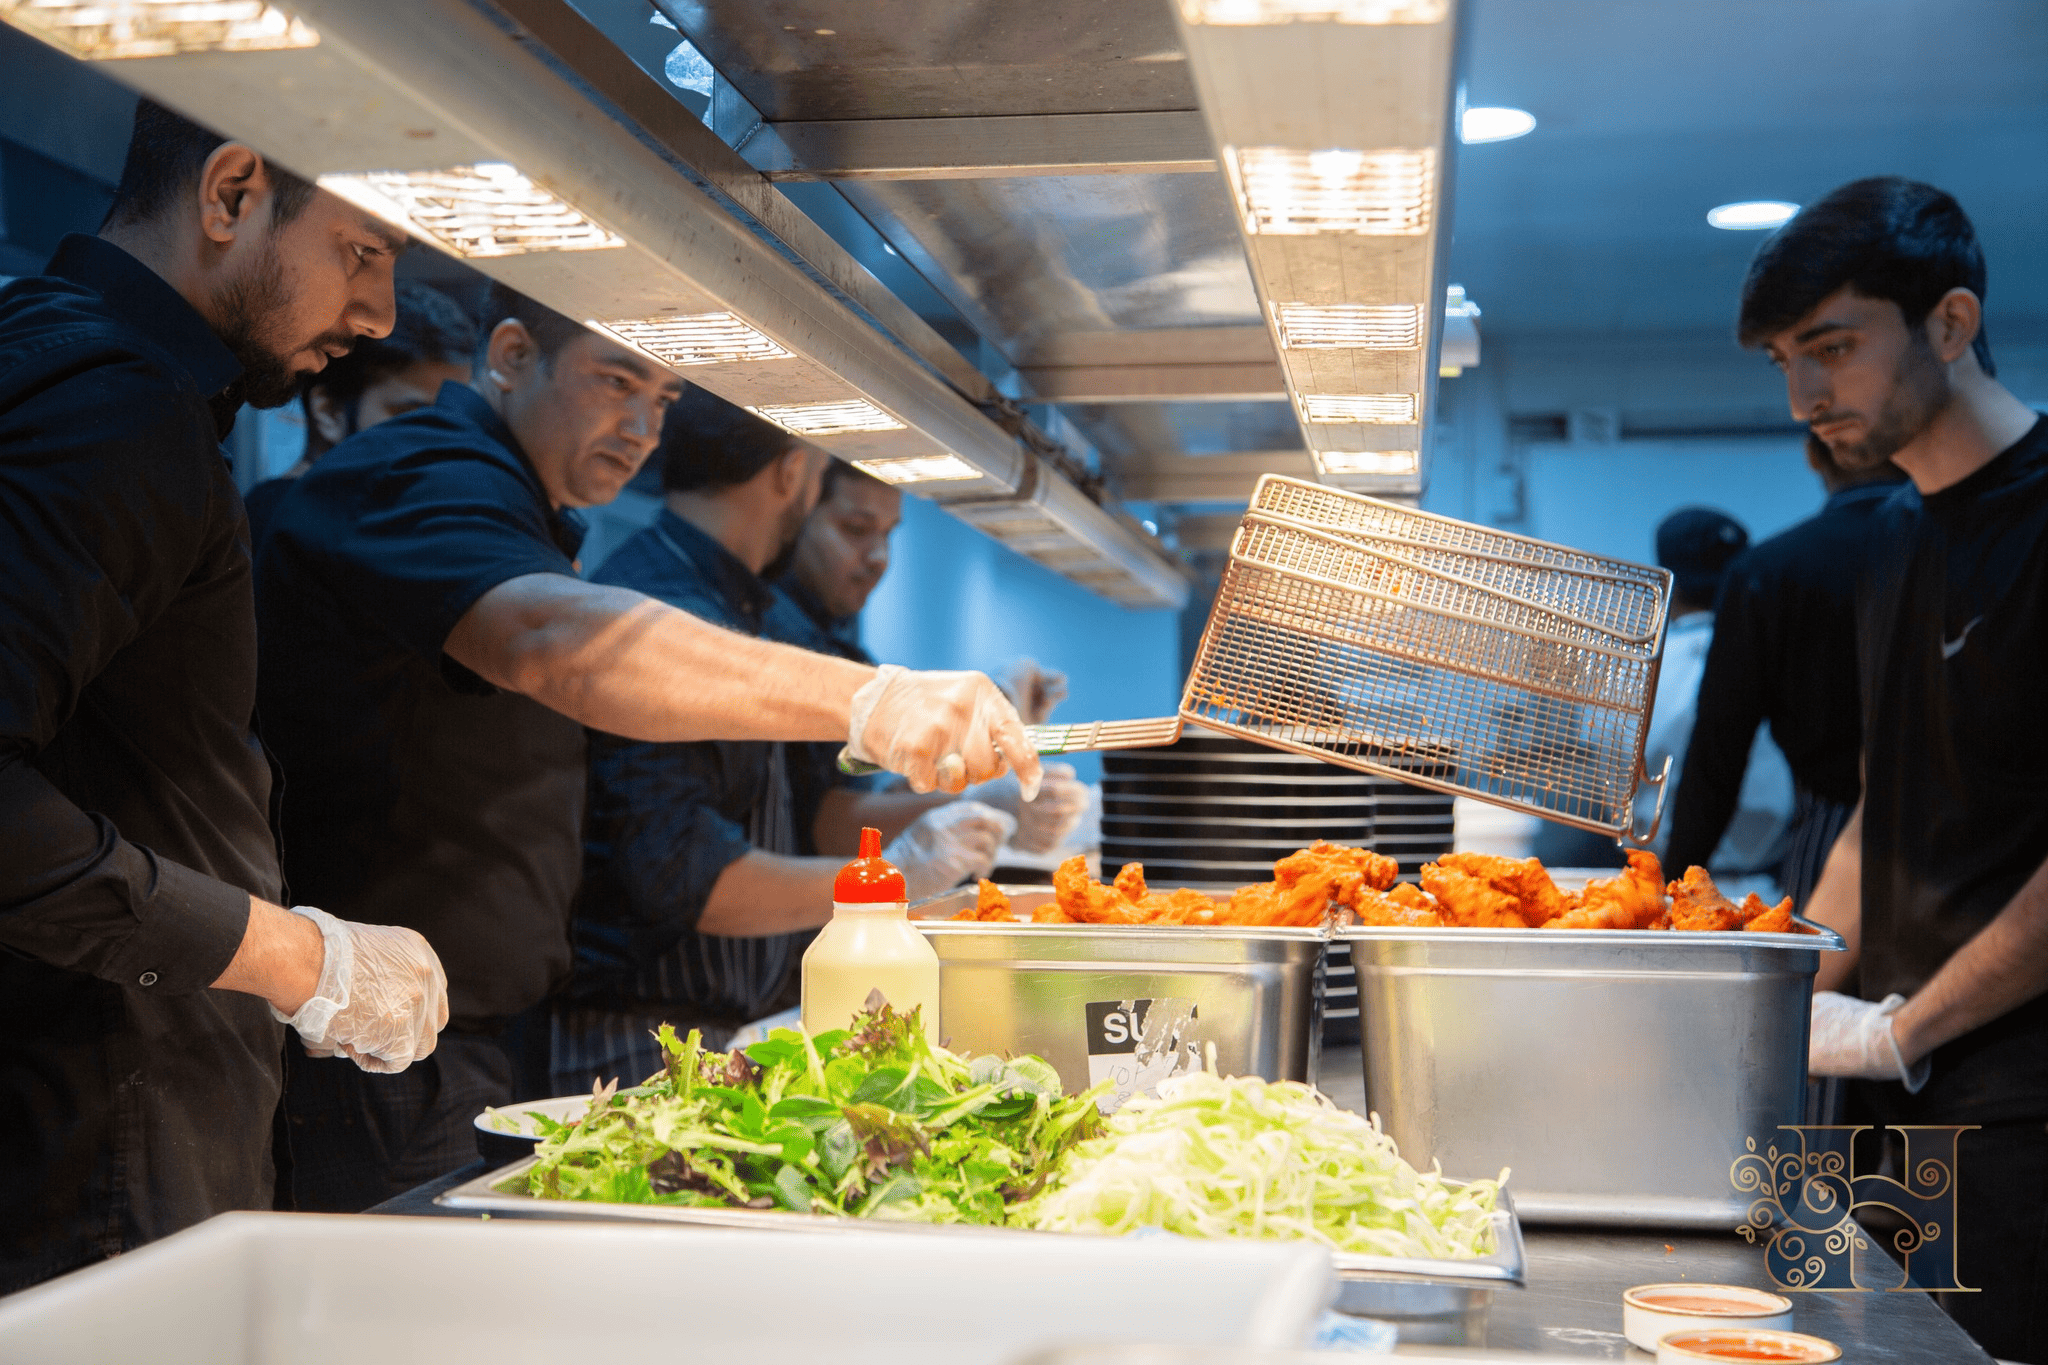 Catering staff serving spicy chicken with fresh salad in a kitchen.